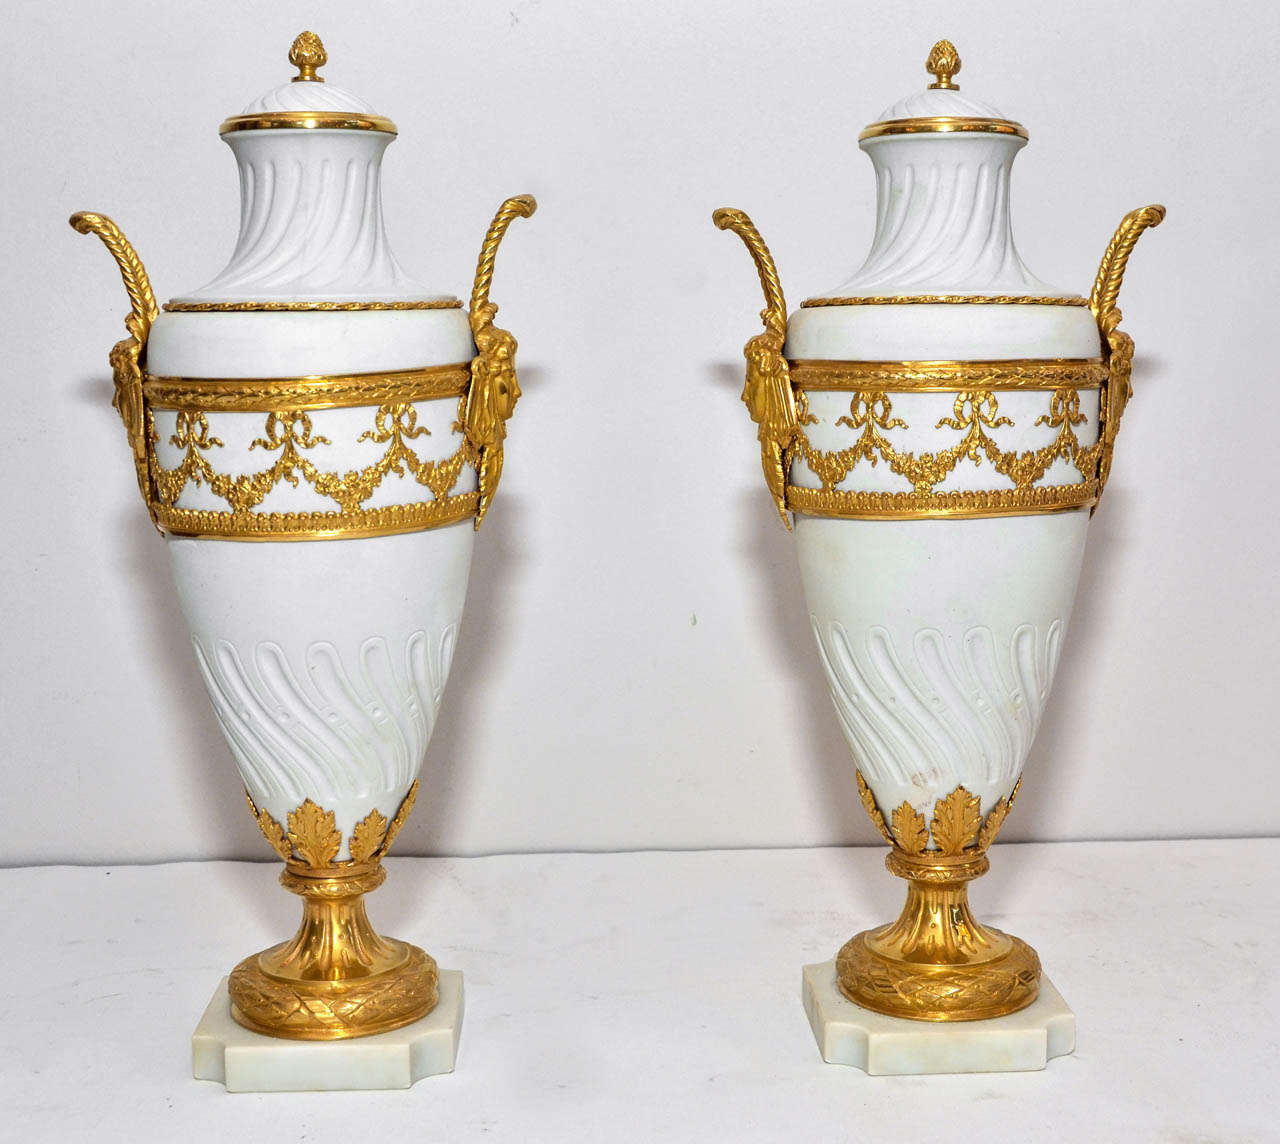 pair of  white porcelain bisquit urns, orned with decoratives gilded  bronzes
with amovible tops